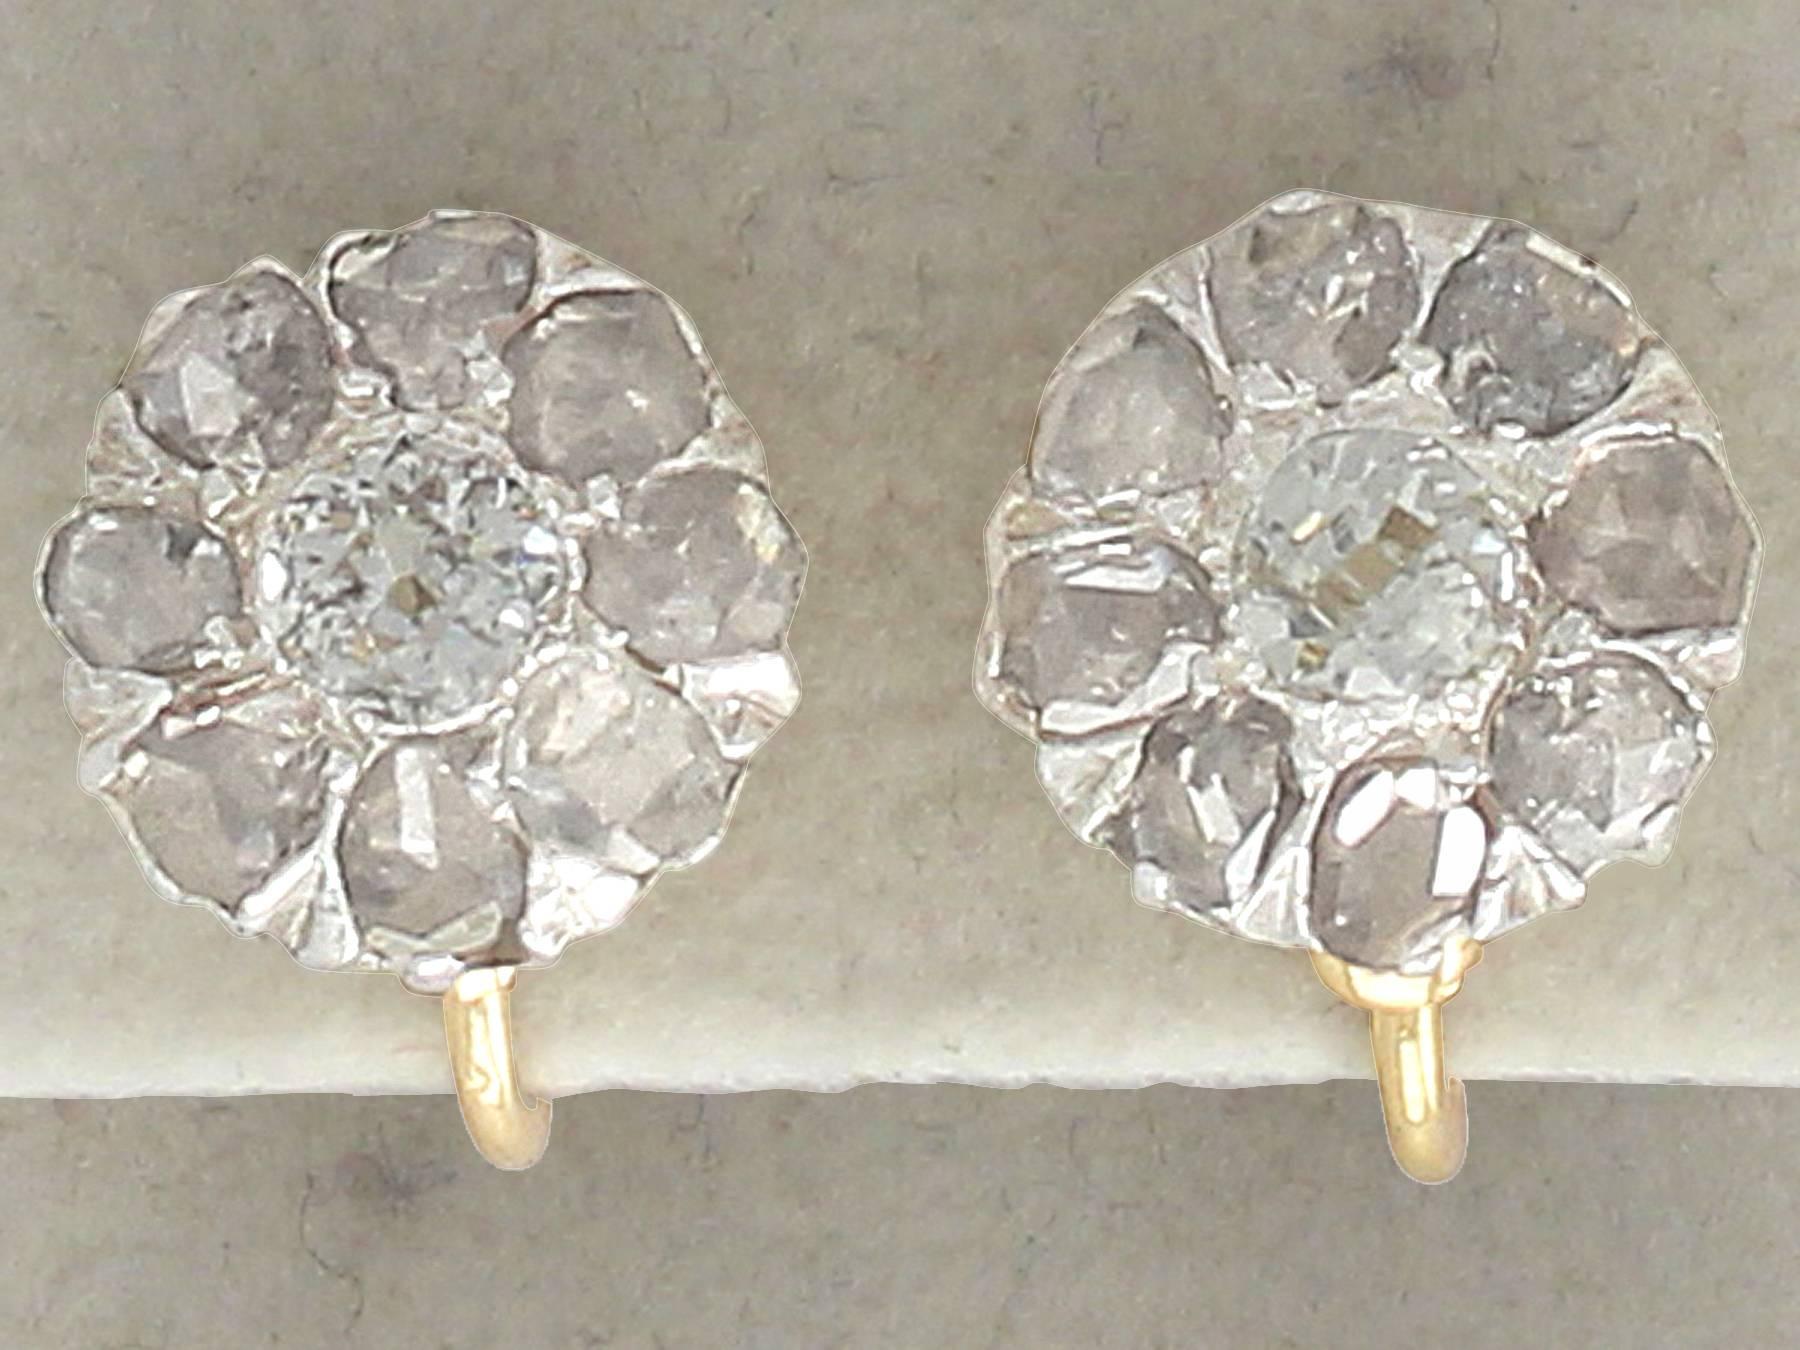 A fine and impressive pair of antique 2.32 carat diamond, 18 karat yellow gold, silver set earrings; part of our antique jewelry and estate jewelry collections

These fine and impressive diamond cluster earrings have been crafted in 18k yellow gold